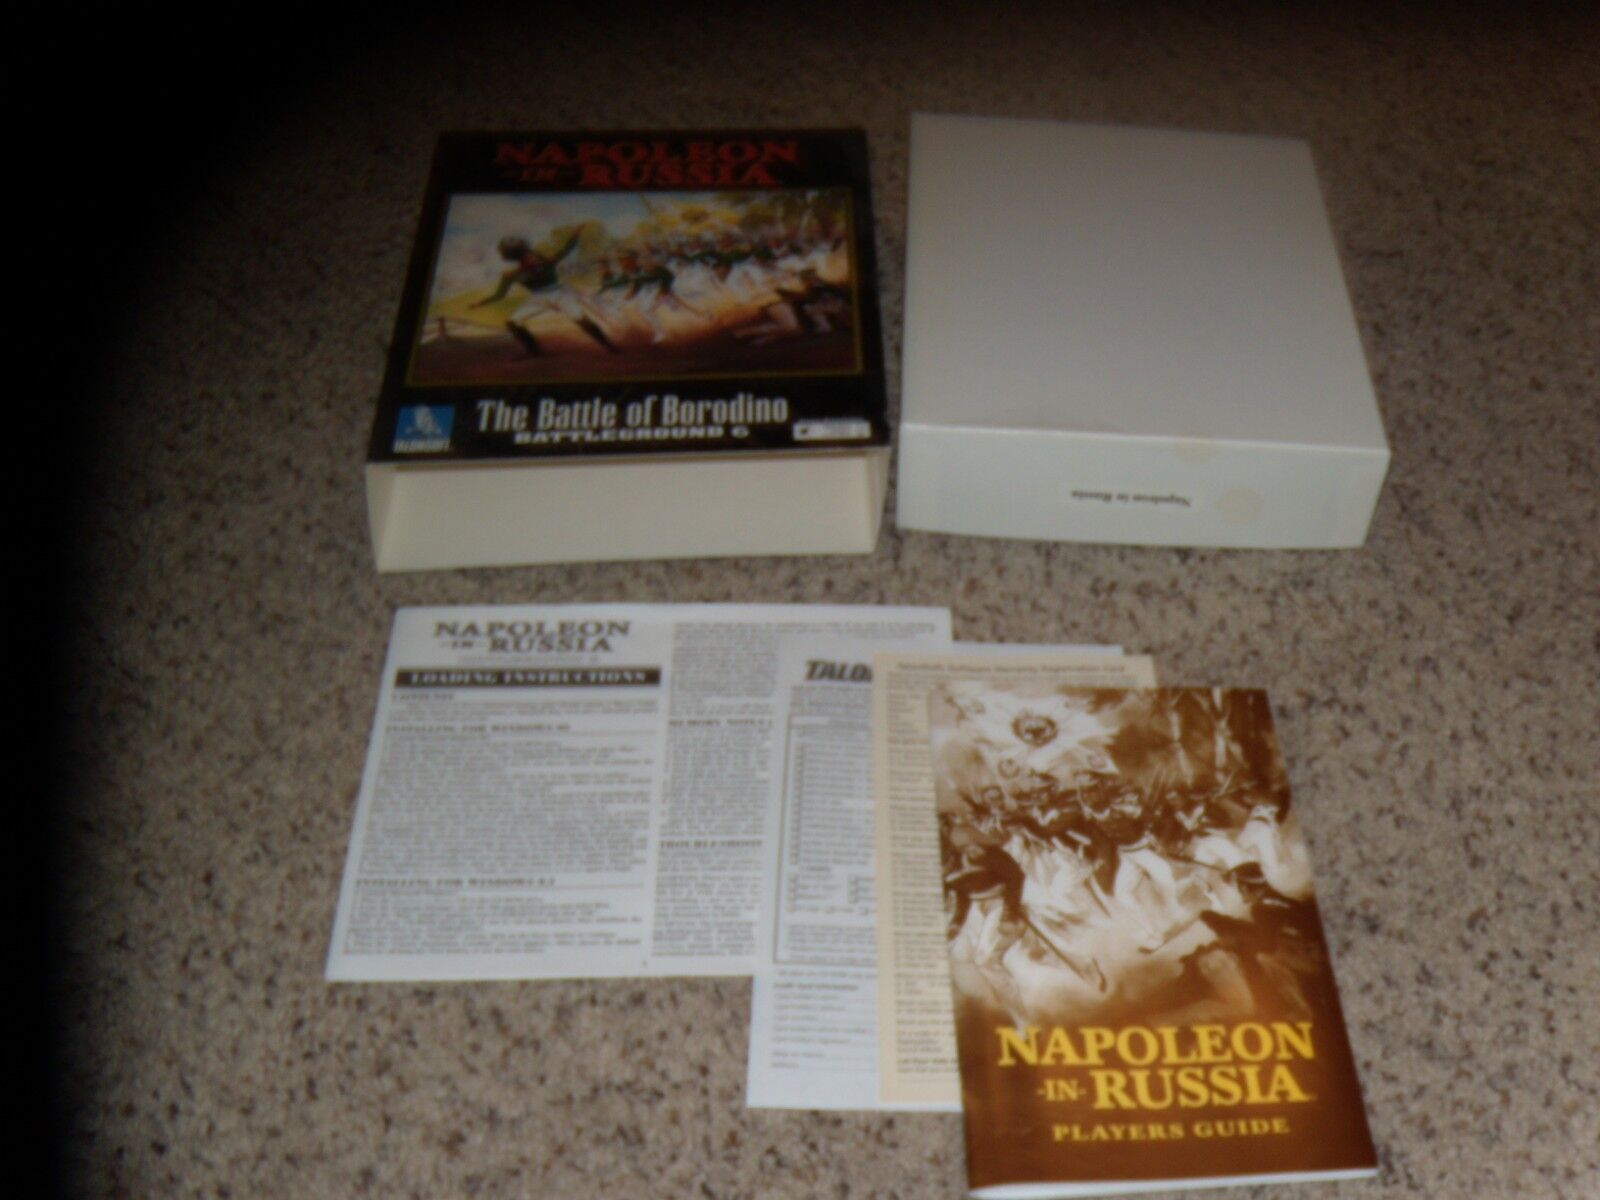 Box, guide and pictured inserts for Napoleon in Russia - No game